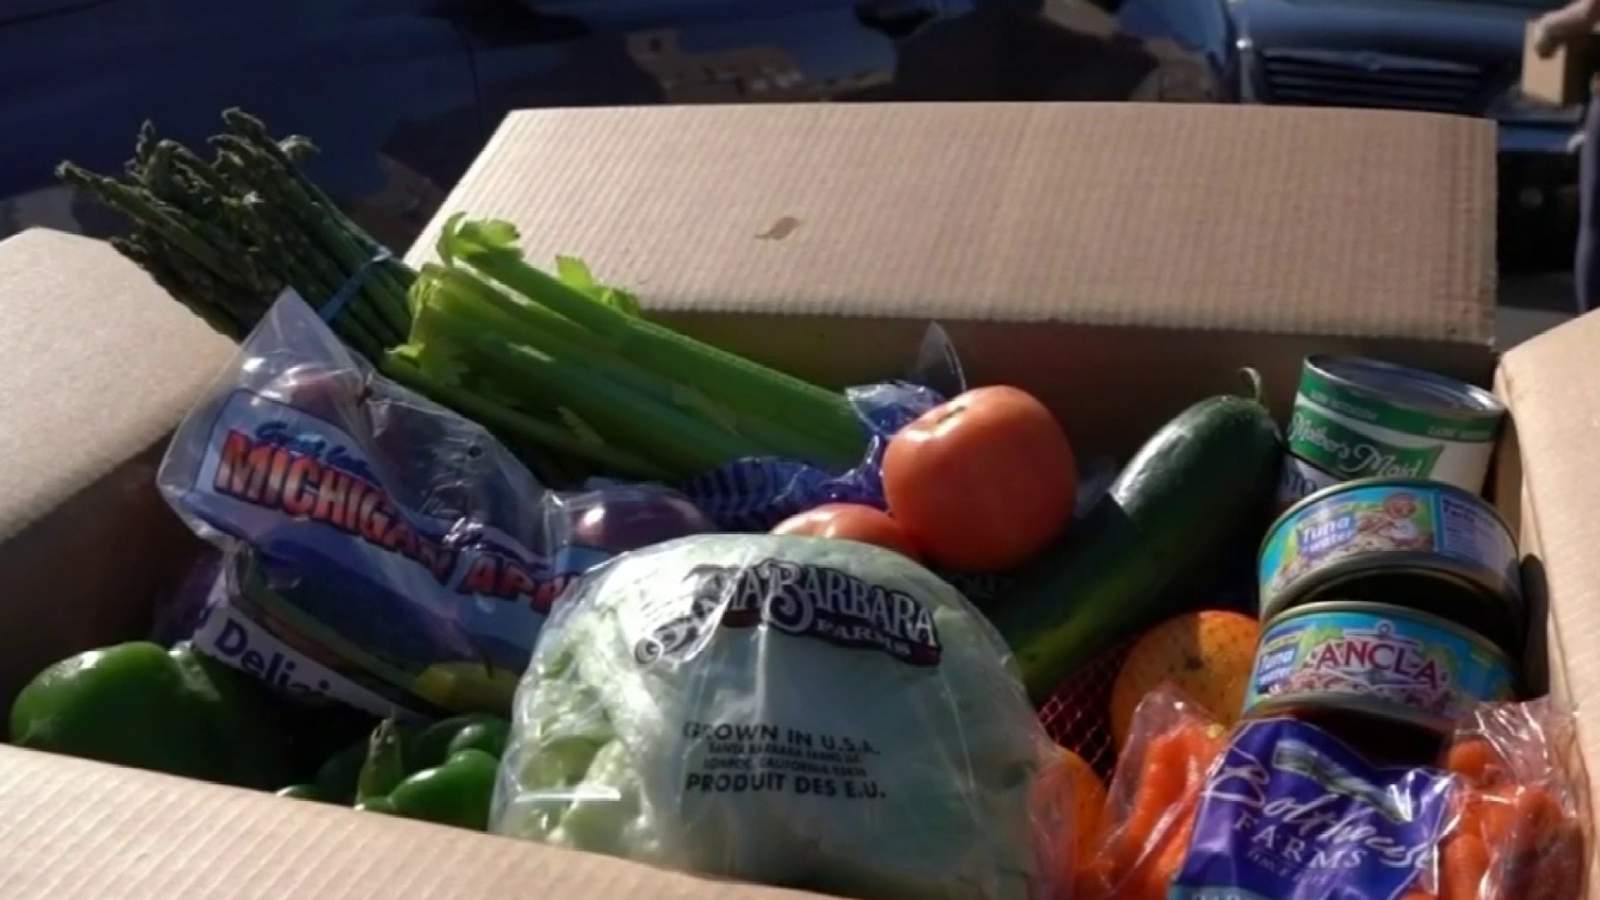 More people in Metro Detroit are facing food insecurity amid COVID-19 pandemic